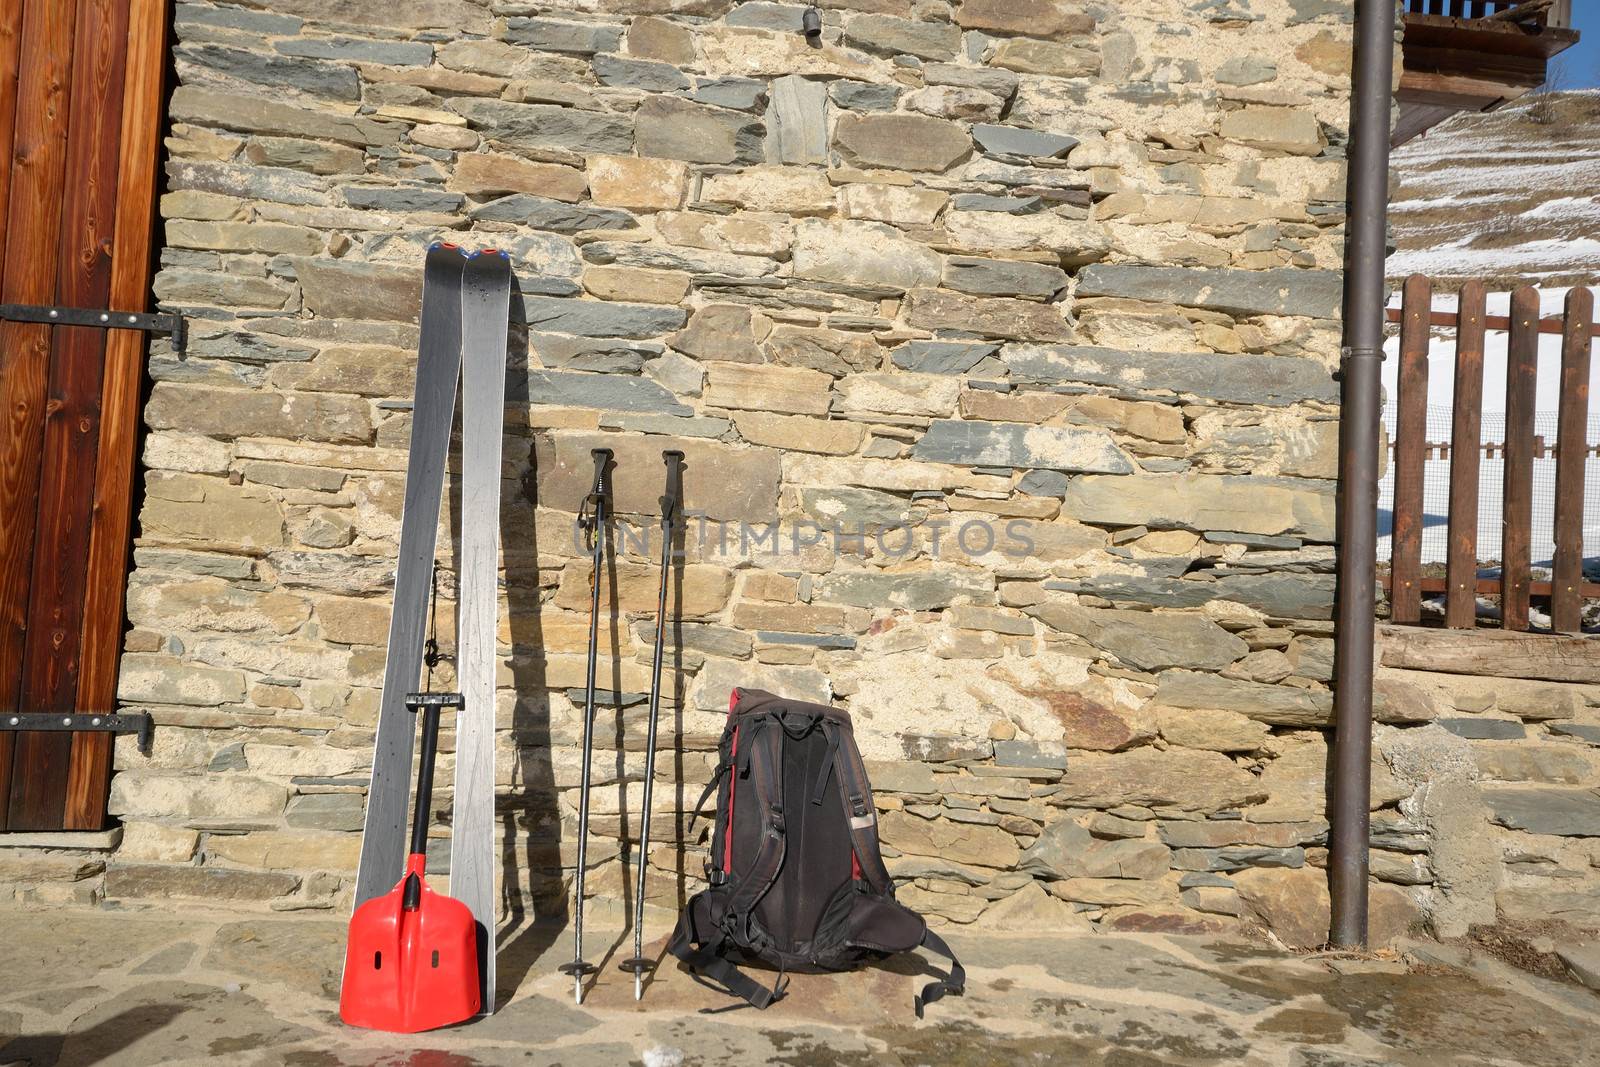 Tools for back country skiing by fbxx